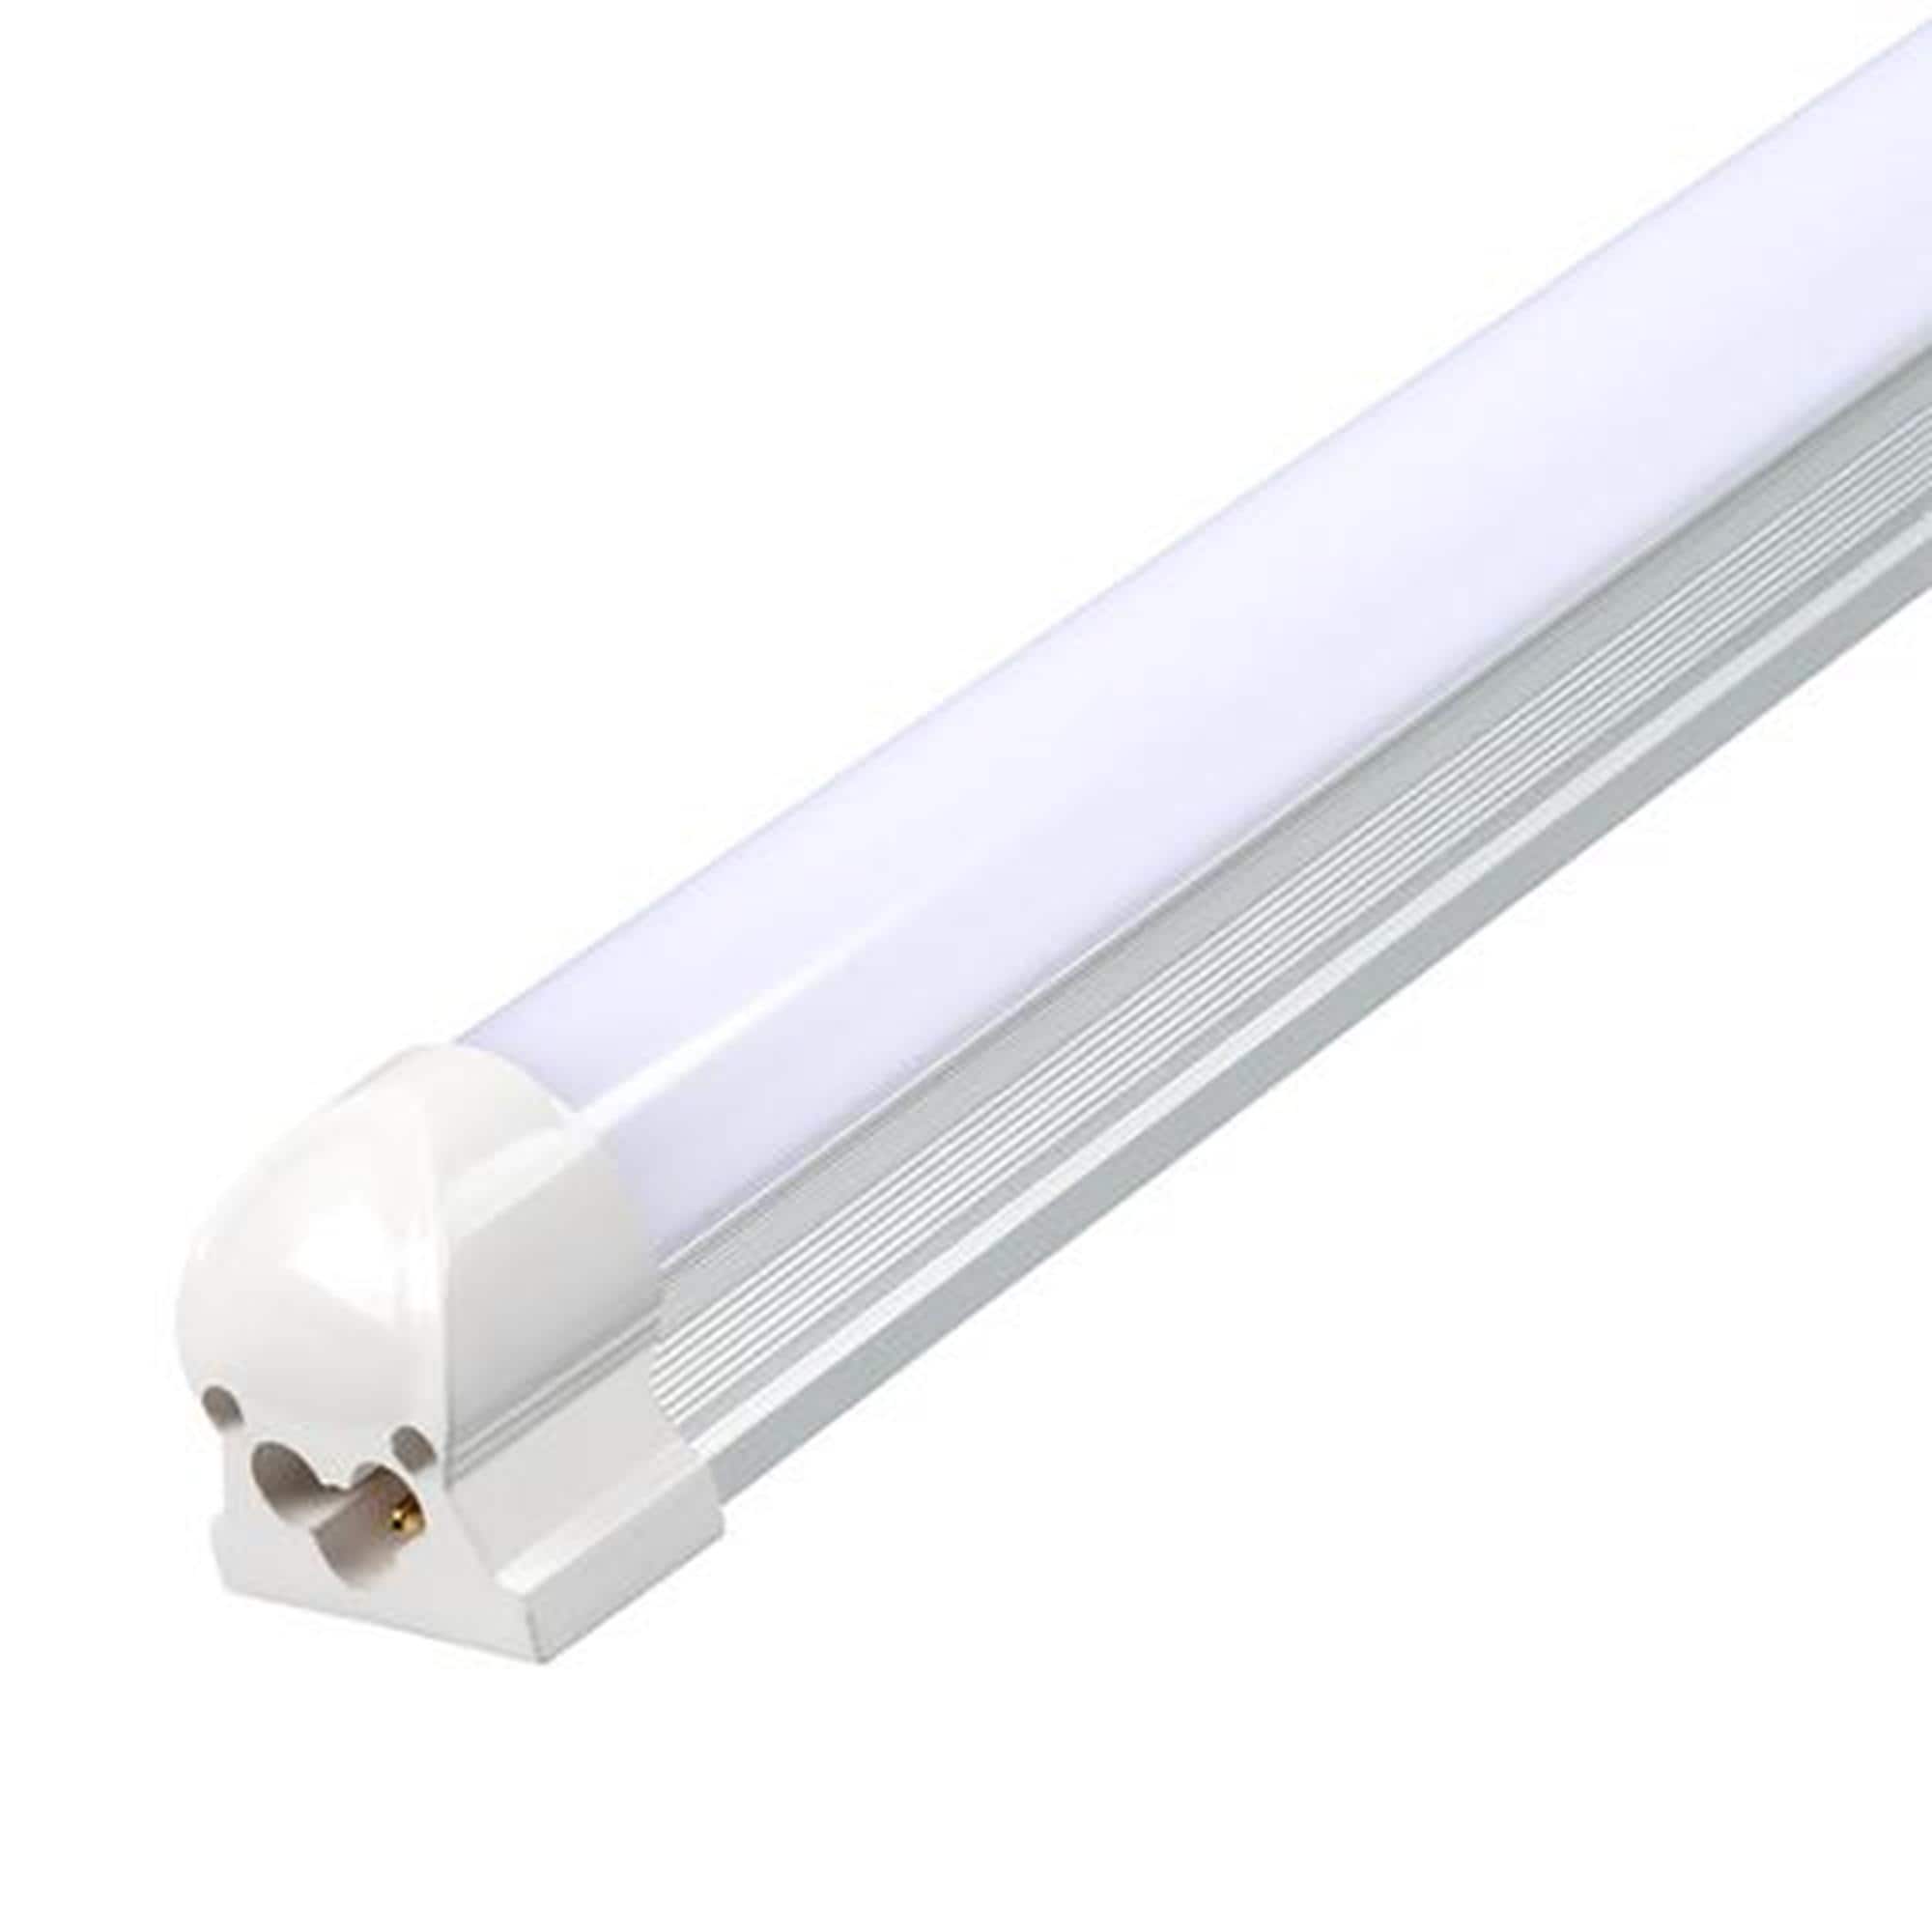 Plug and Play INTEGRATED T8 T12 LED TUBE LIGHT 4FT 20 WAT 6500K Milky Lens SALE 